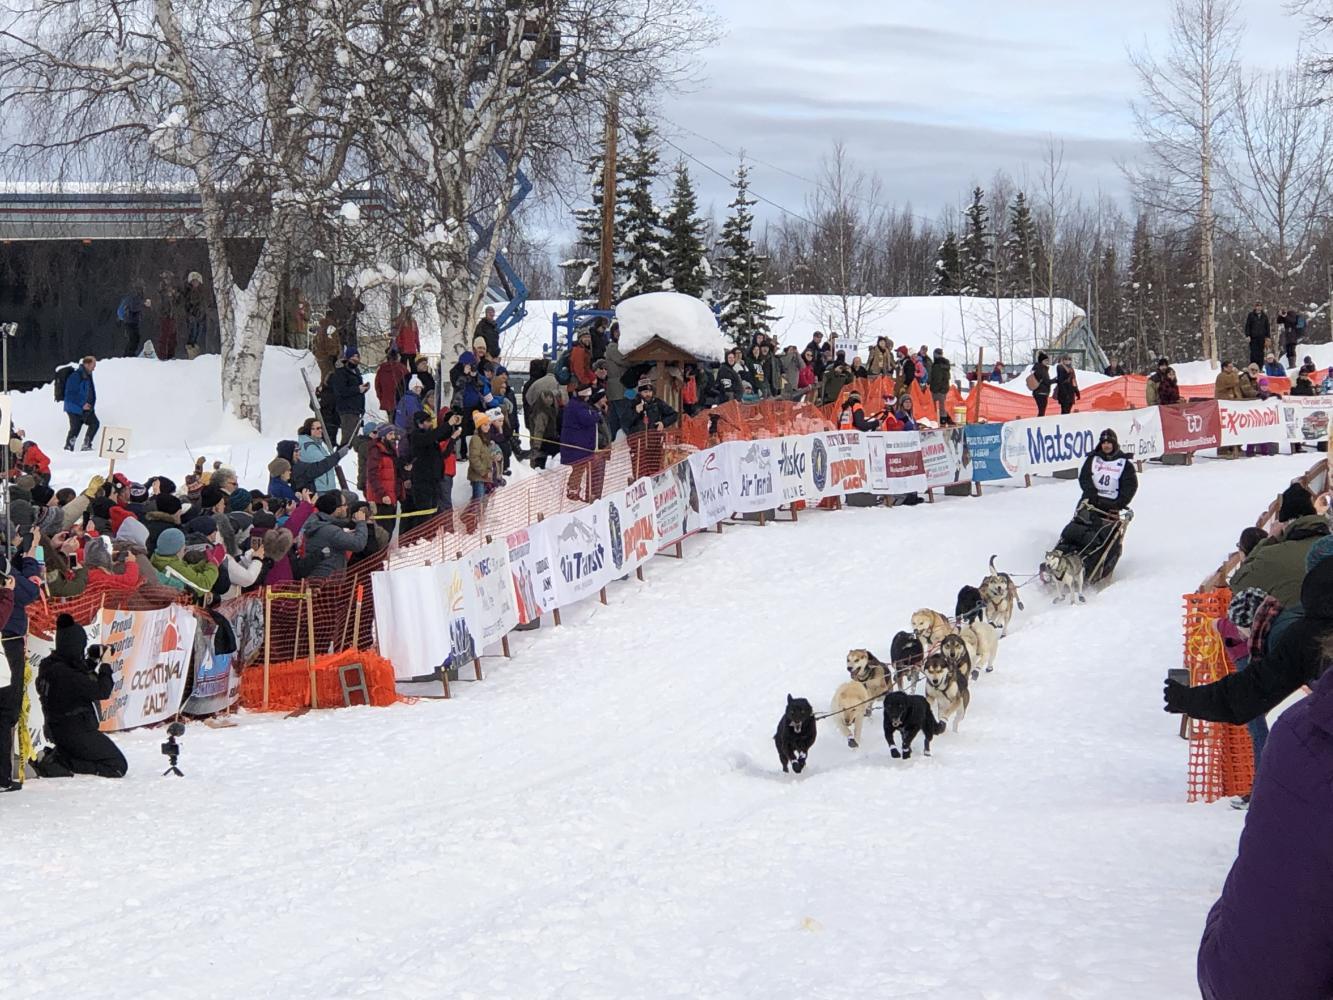 Racer and sled dogs at Iditarod